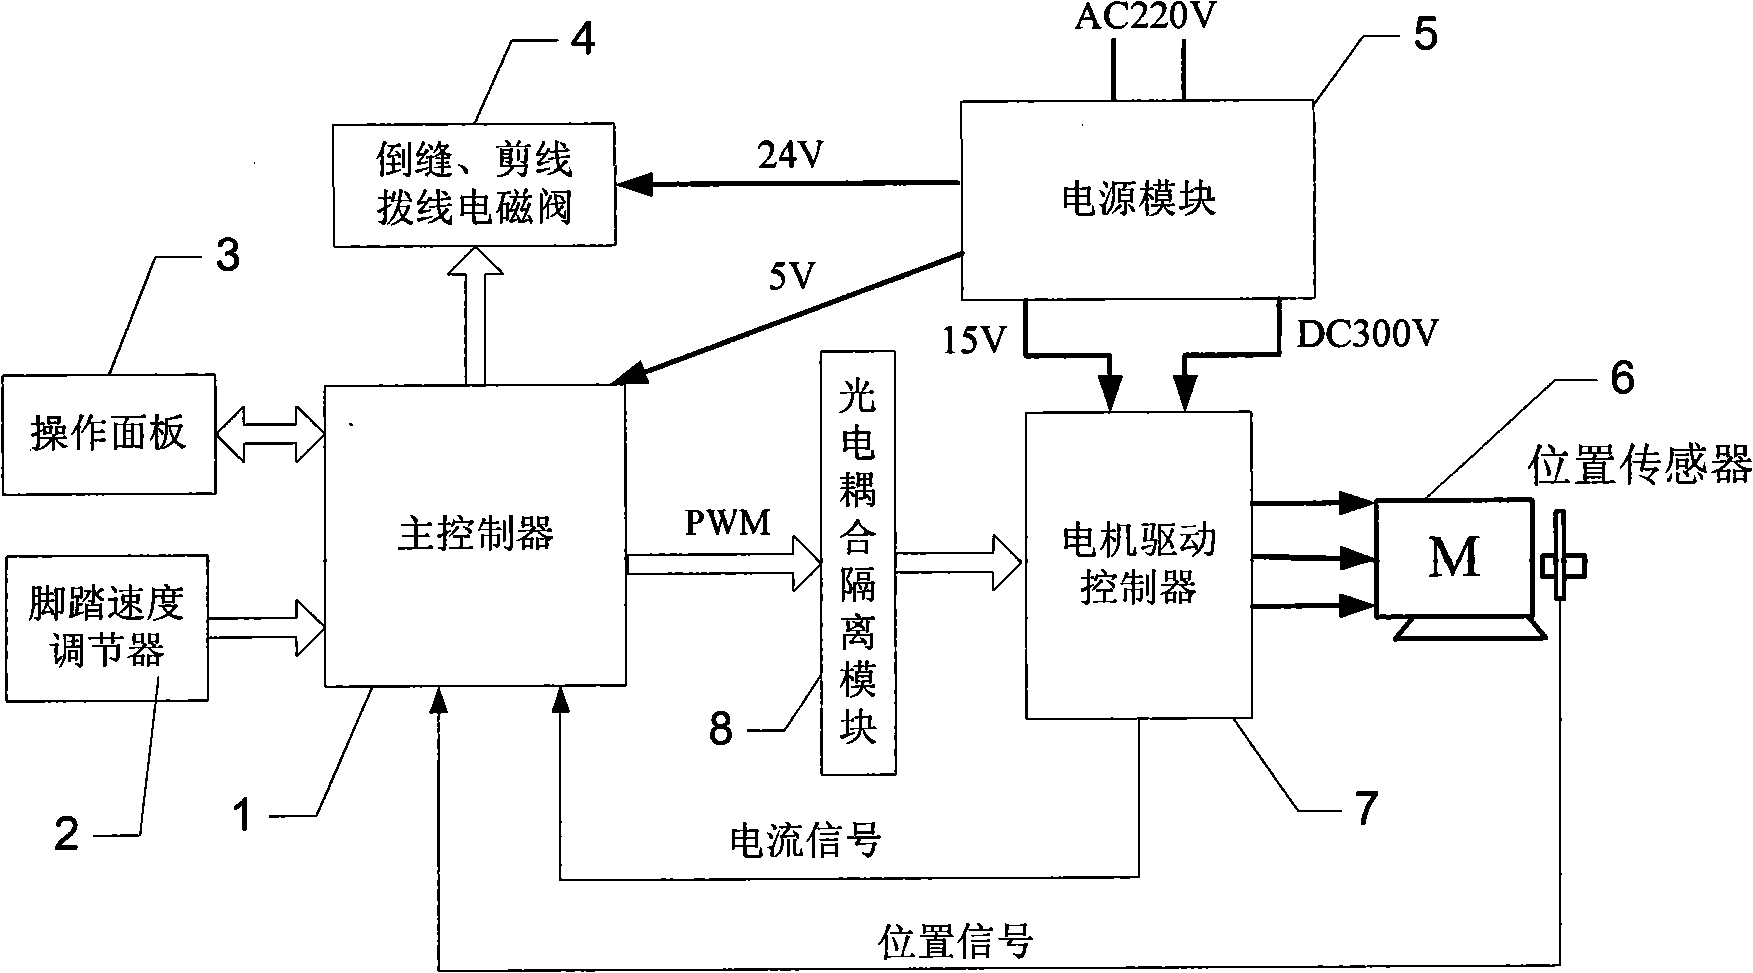 Computer control system for novel direct drive lockstitch sewing machine